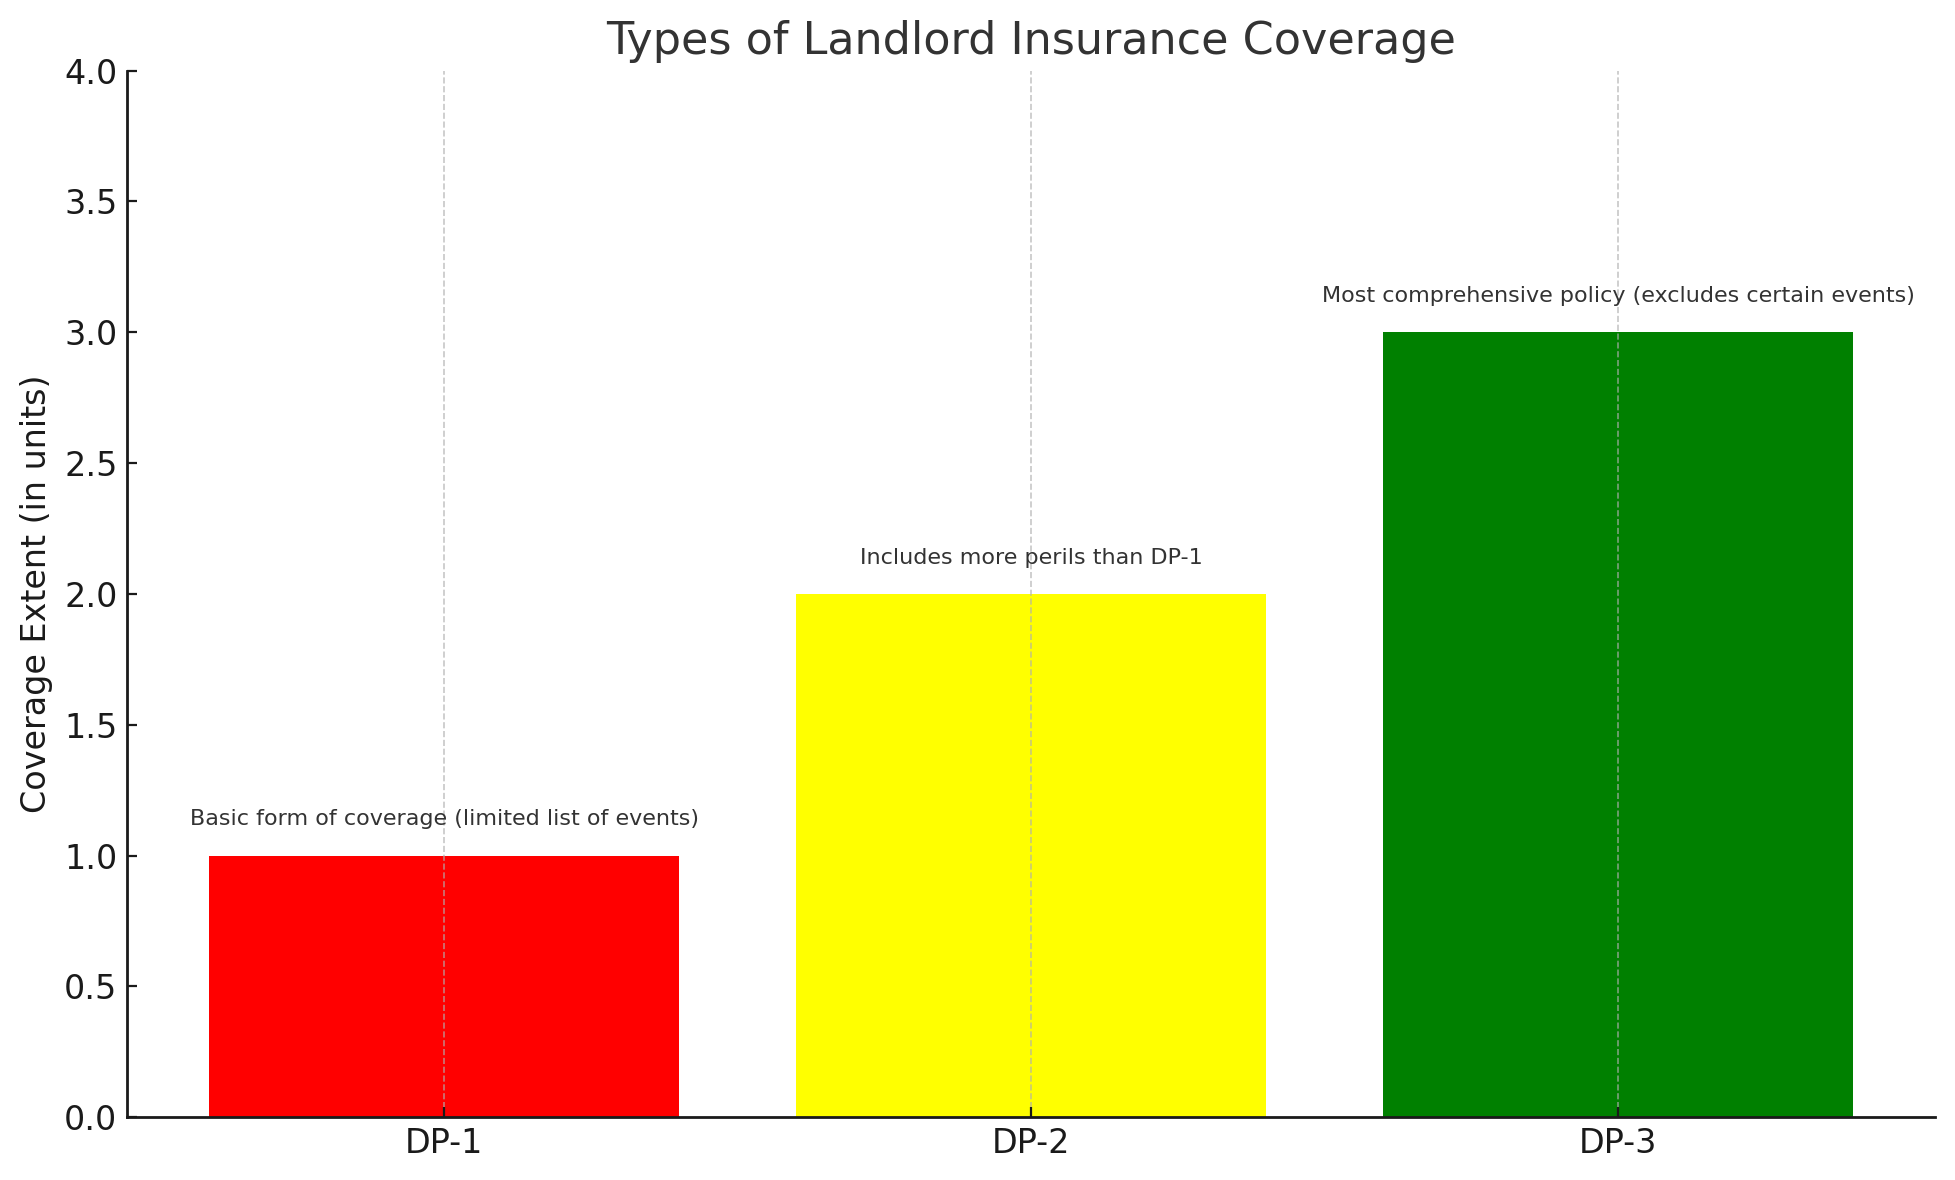 Landlord Insurance Costs from DP-1 to DP-3